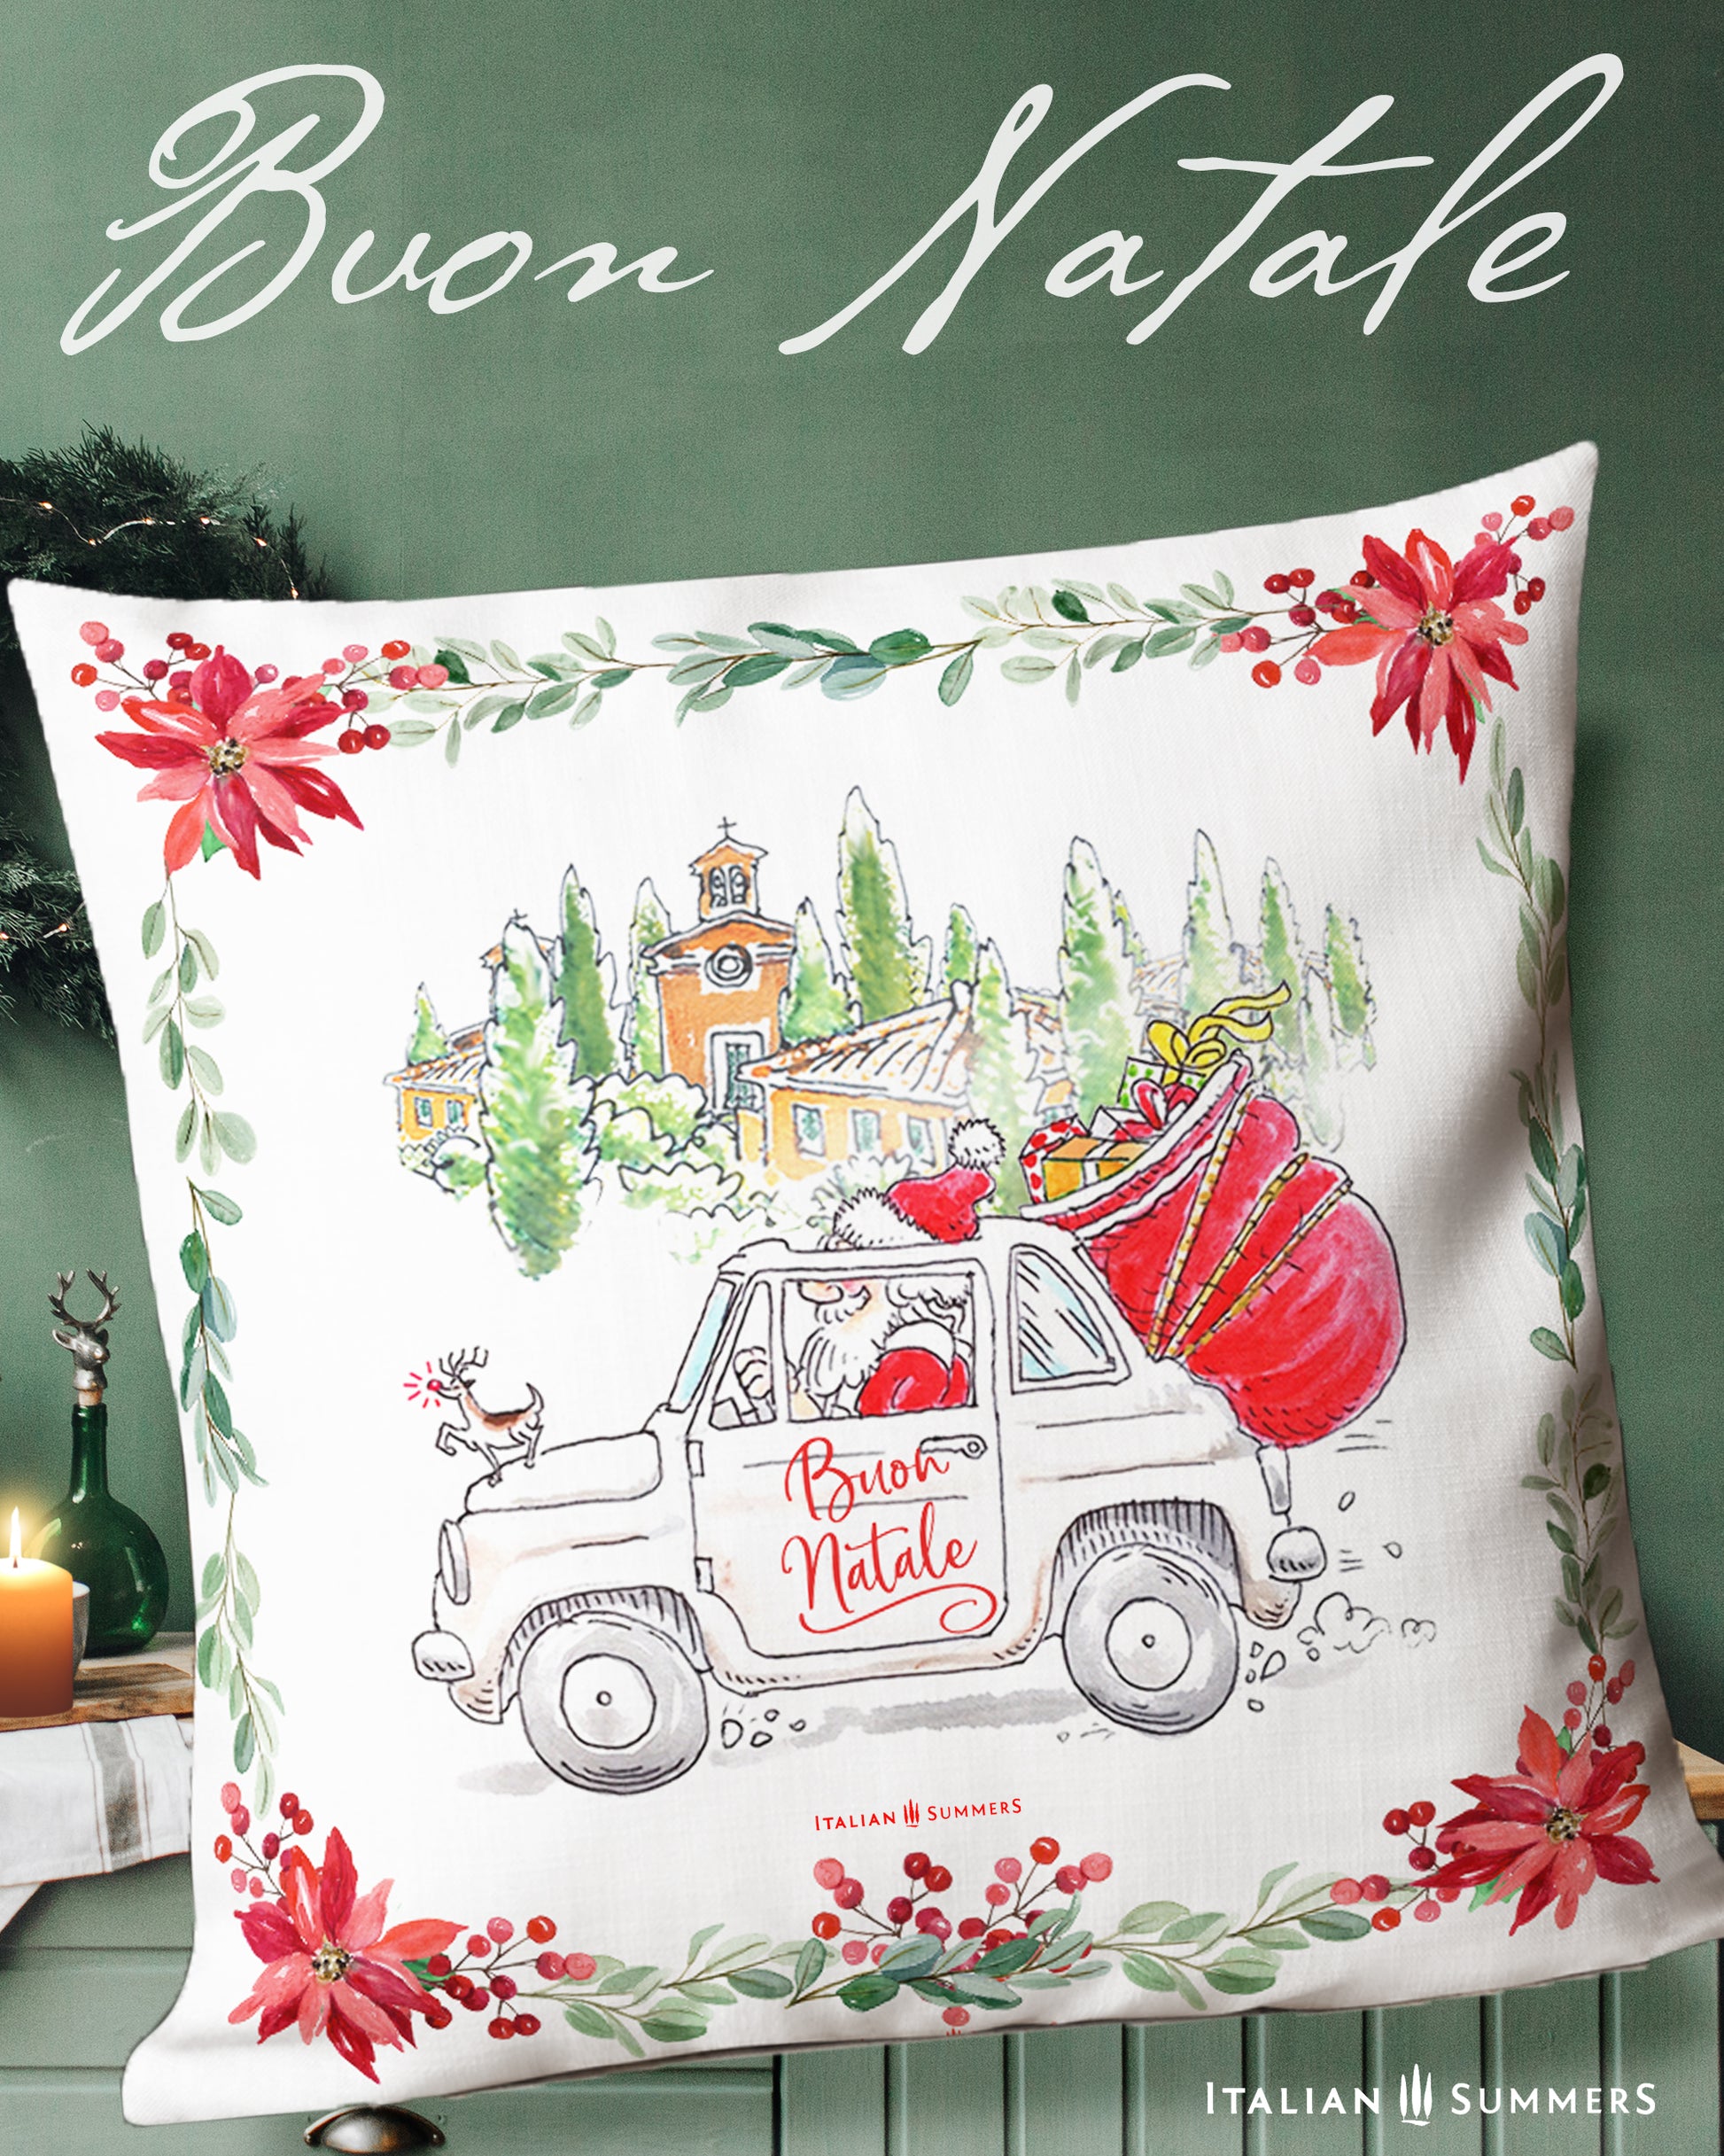 Festive Italy-themed pillow-case and of Babbo Natale driving his vintage Fiat 500 through the Italian countryside!  Designed by Italian Summers